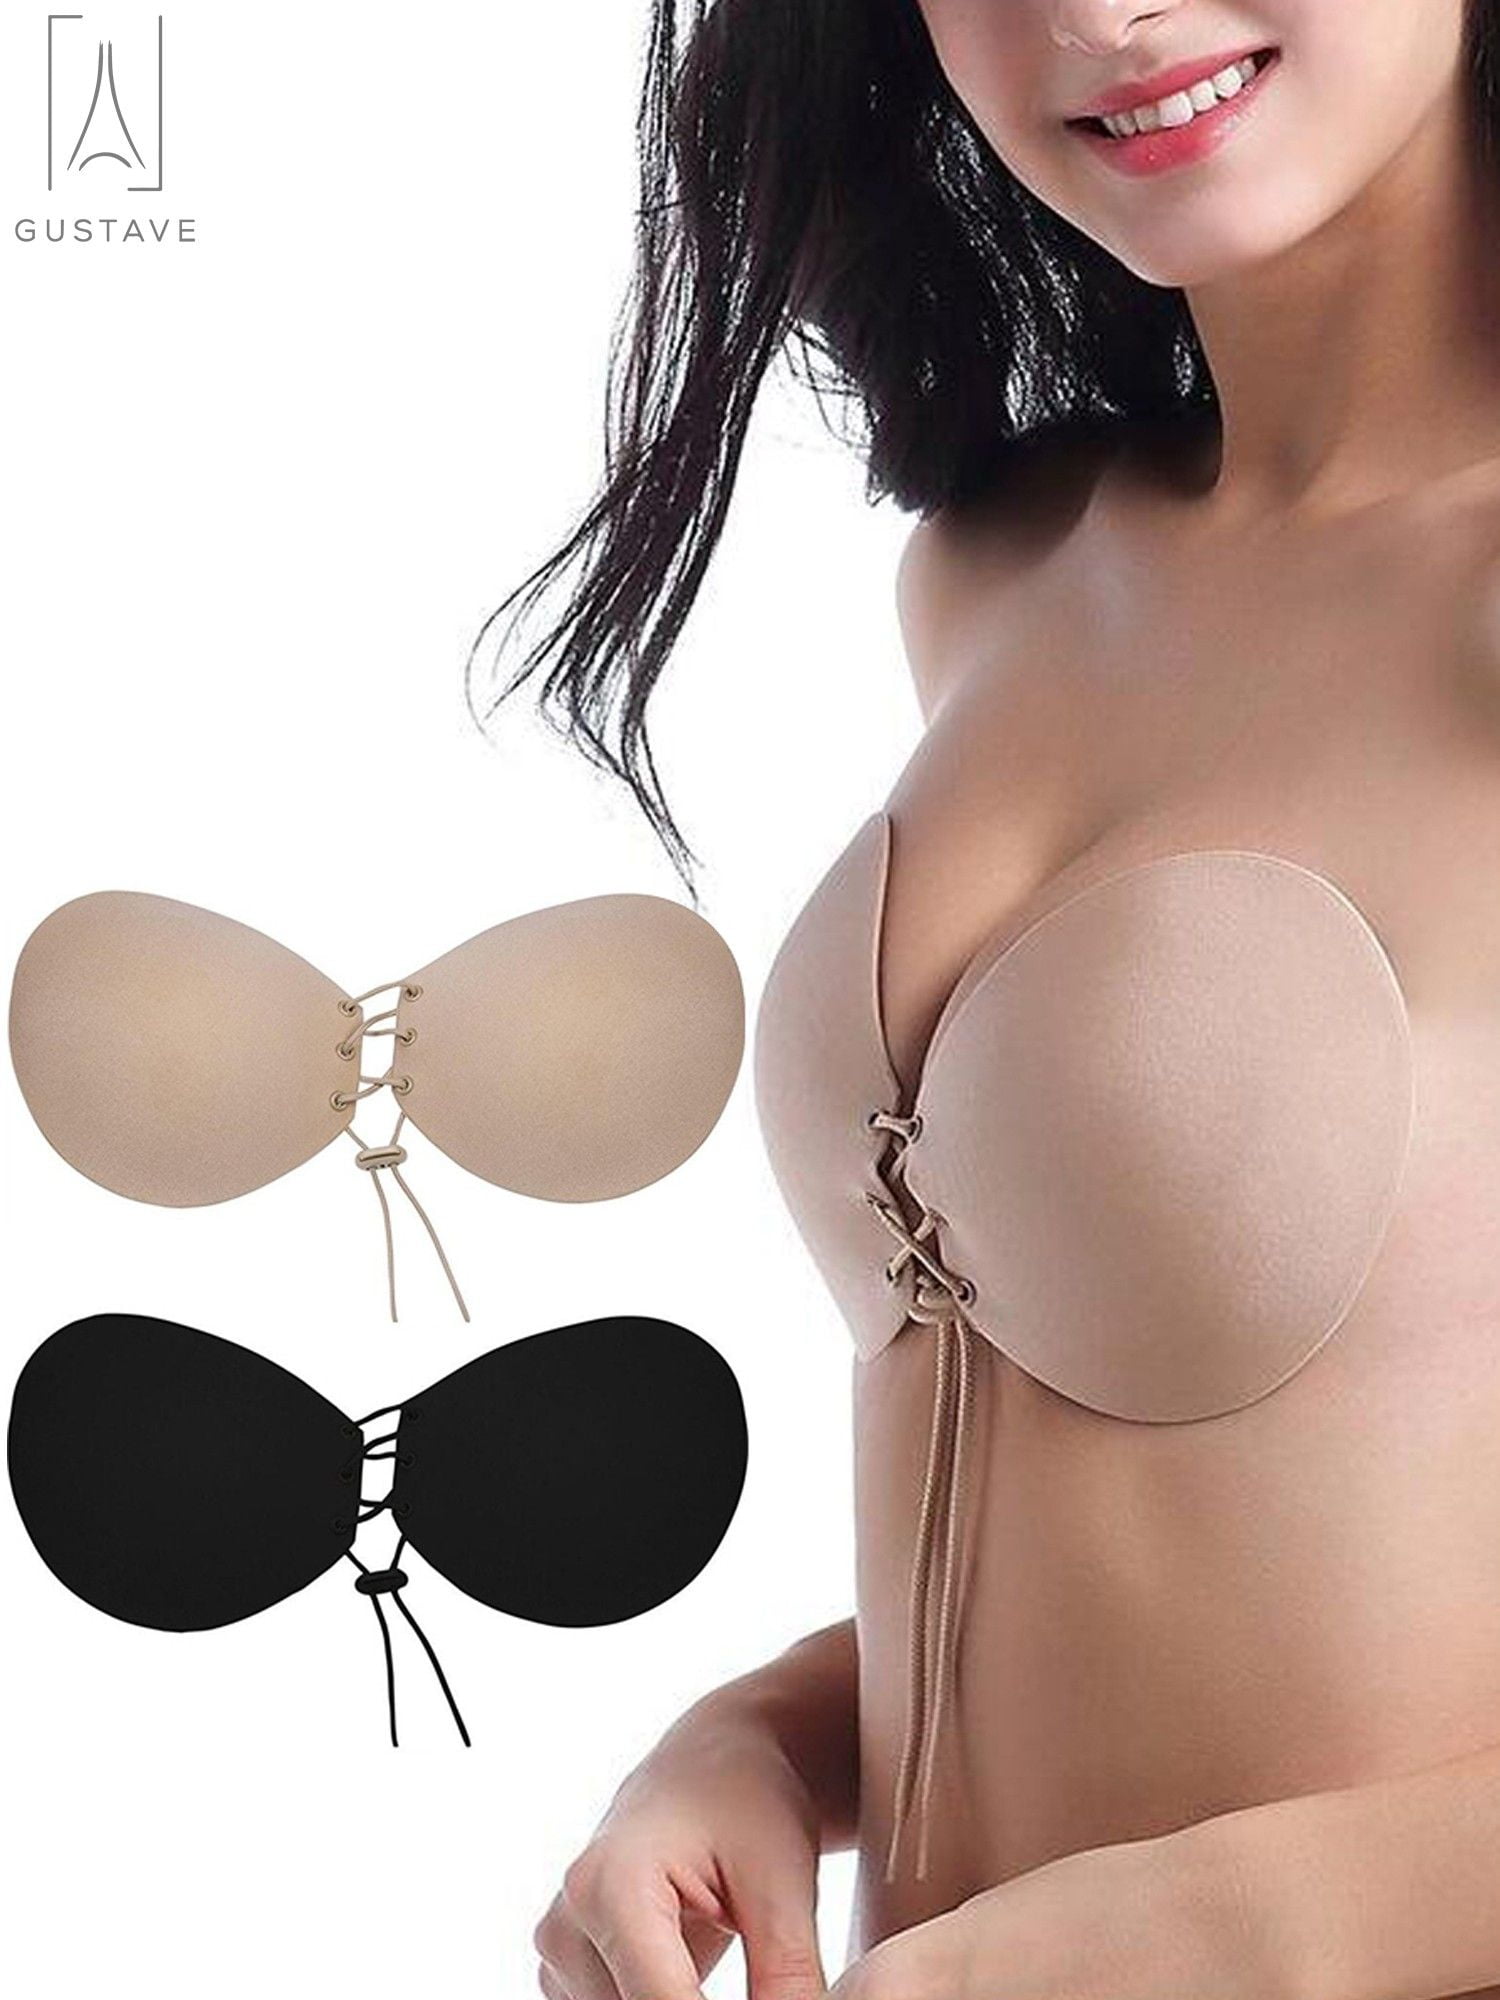 Gustavedesign 2-Pack Self Adhesive Bra Strapless Sticky Invisible Push up  Silicone Bra for Backless Dress with Drawstring Suit B Cup 